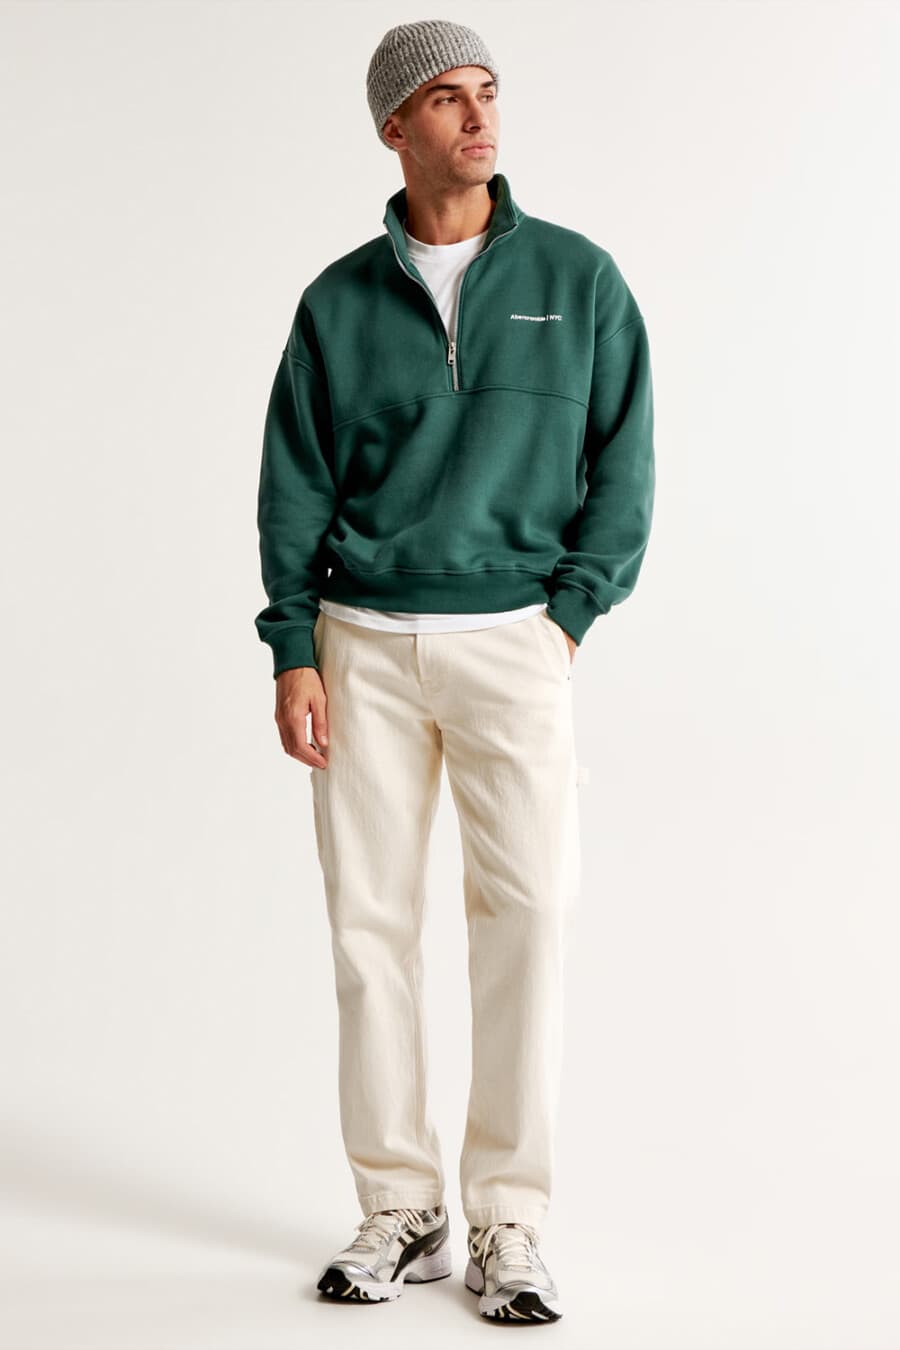 Men's off-white jeans, white T-shirt, green half-zip sweatshirt, grey ribbed beanie and chunky New Balance running shoes outfit